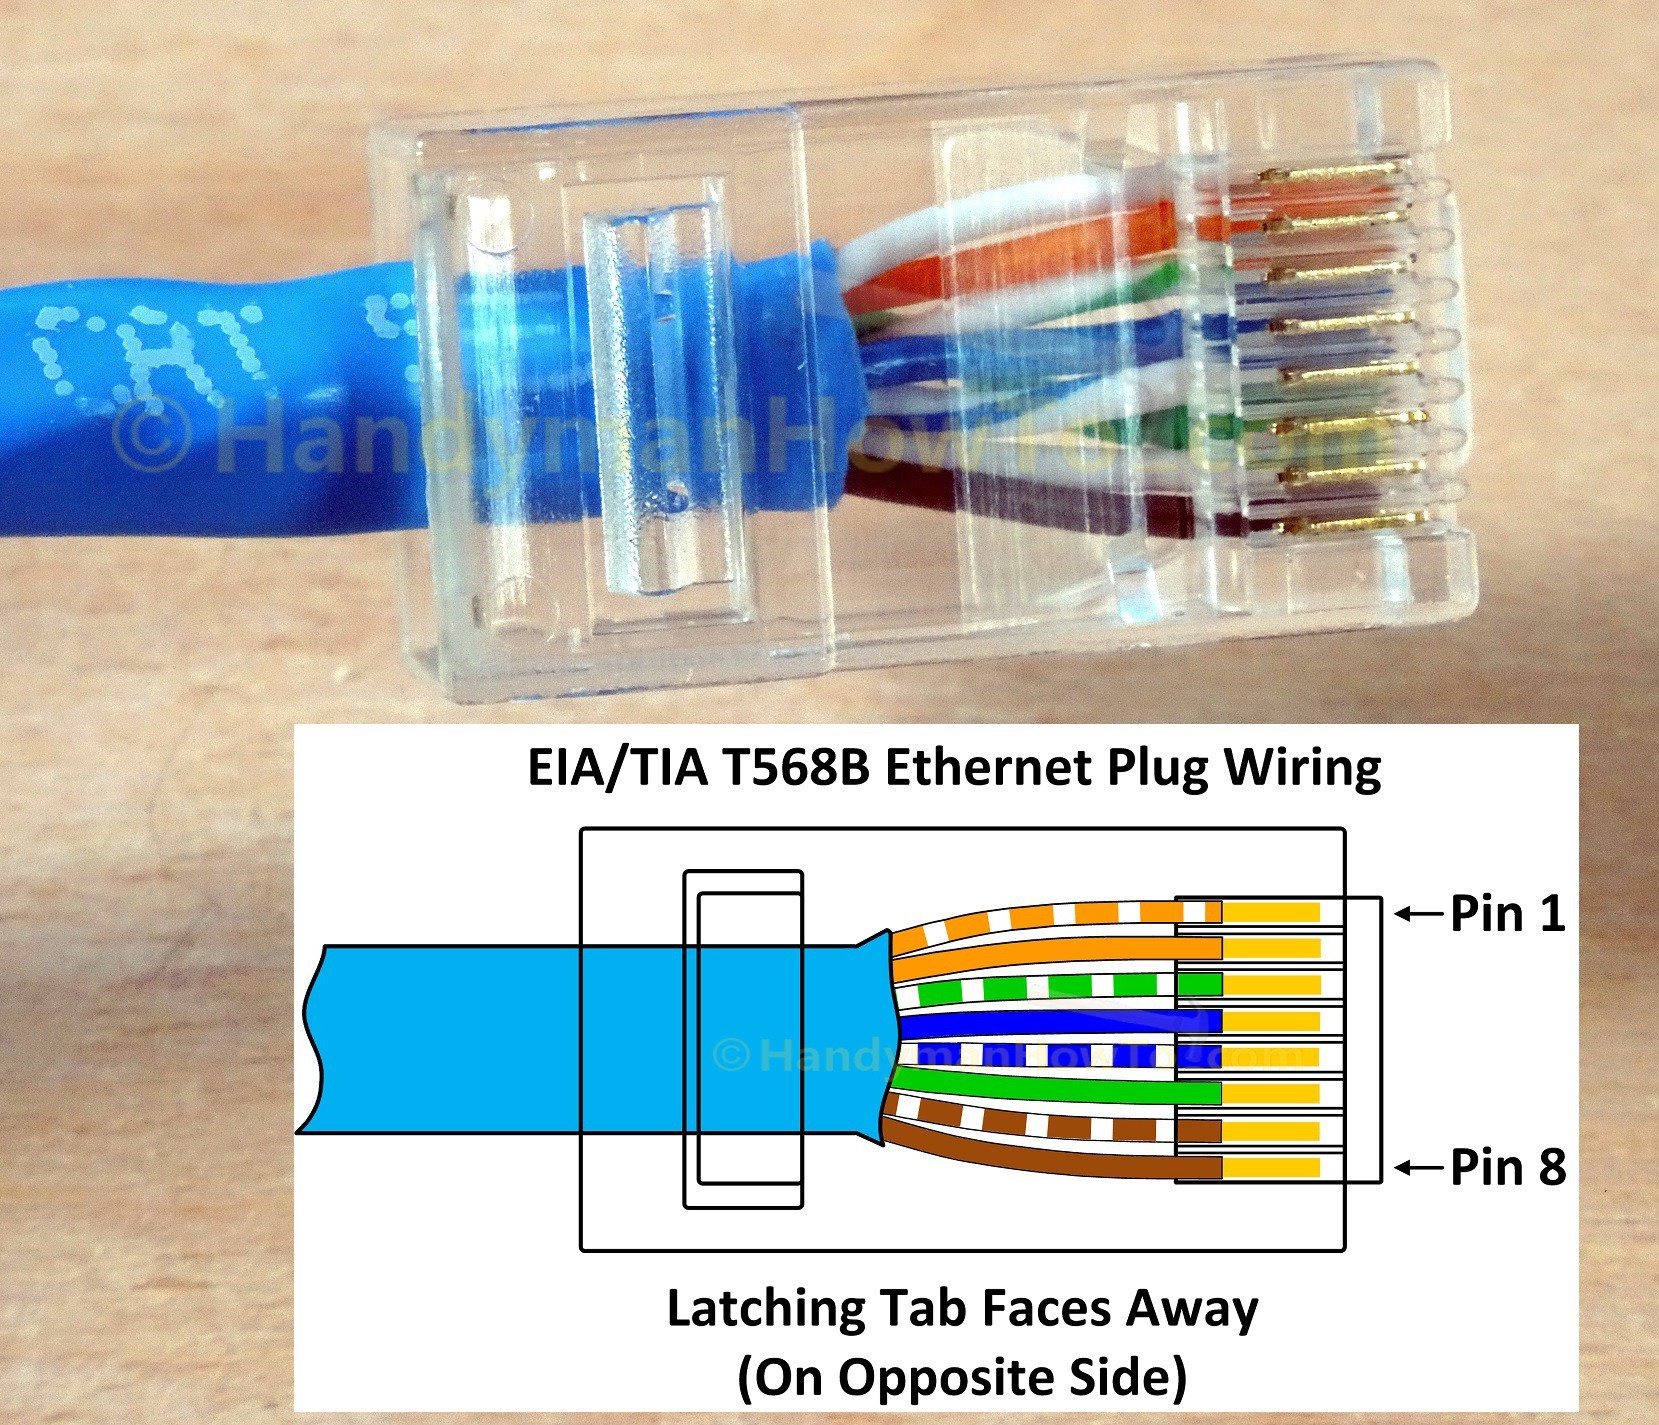 How to Make an Ethernet Network Cable Cat5e Cat6